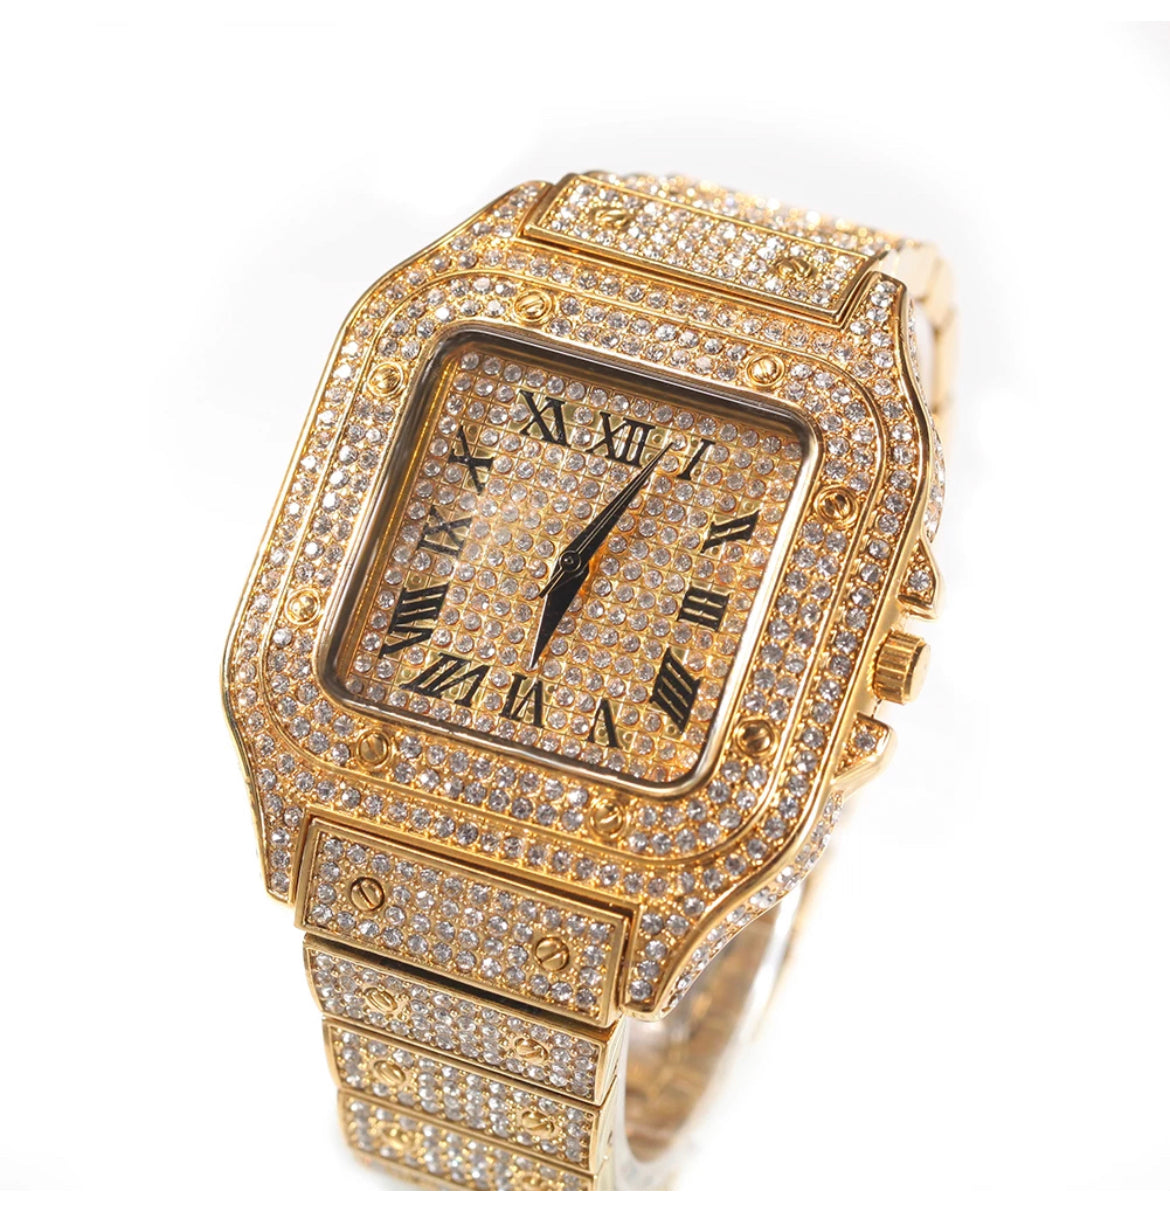 Luxury “Fully Iced Out” Watch